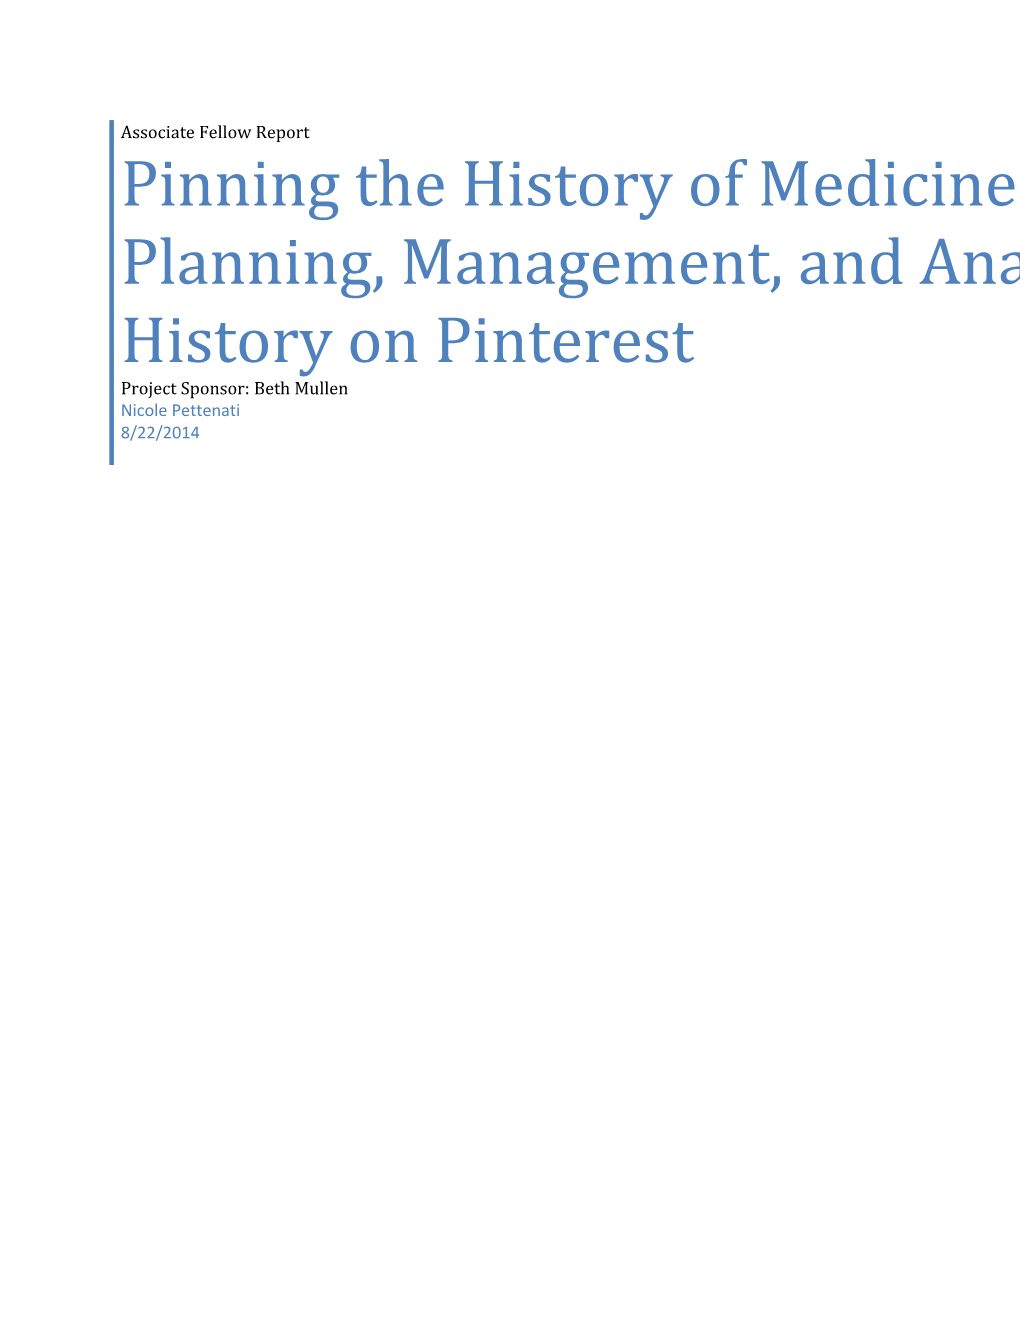 Pinning the History of Medicine: Strategic Planning, Management, and Analysis of NLM History